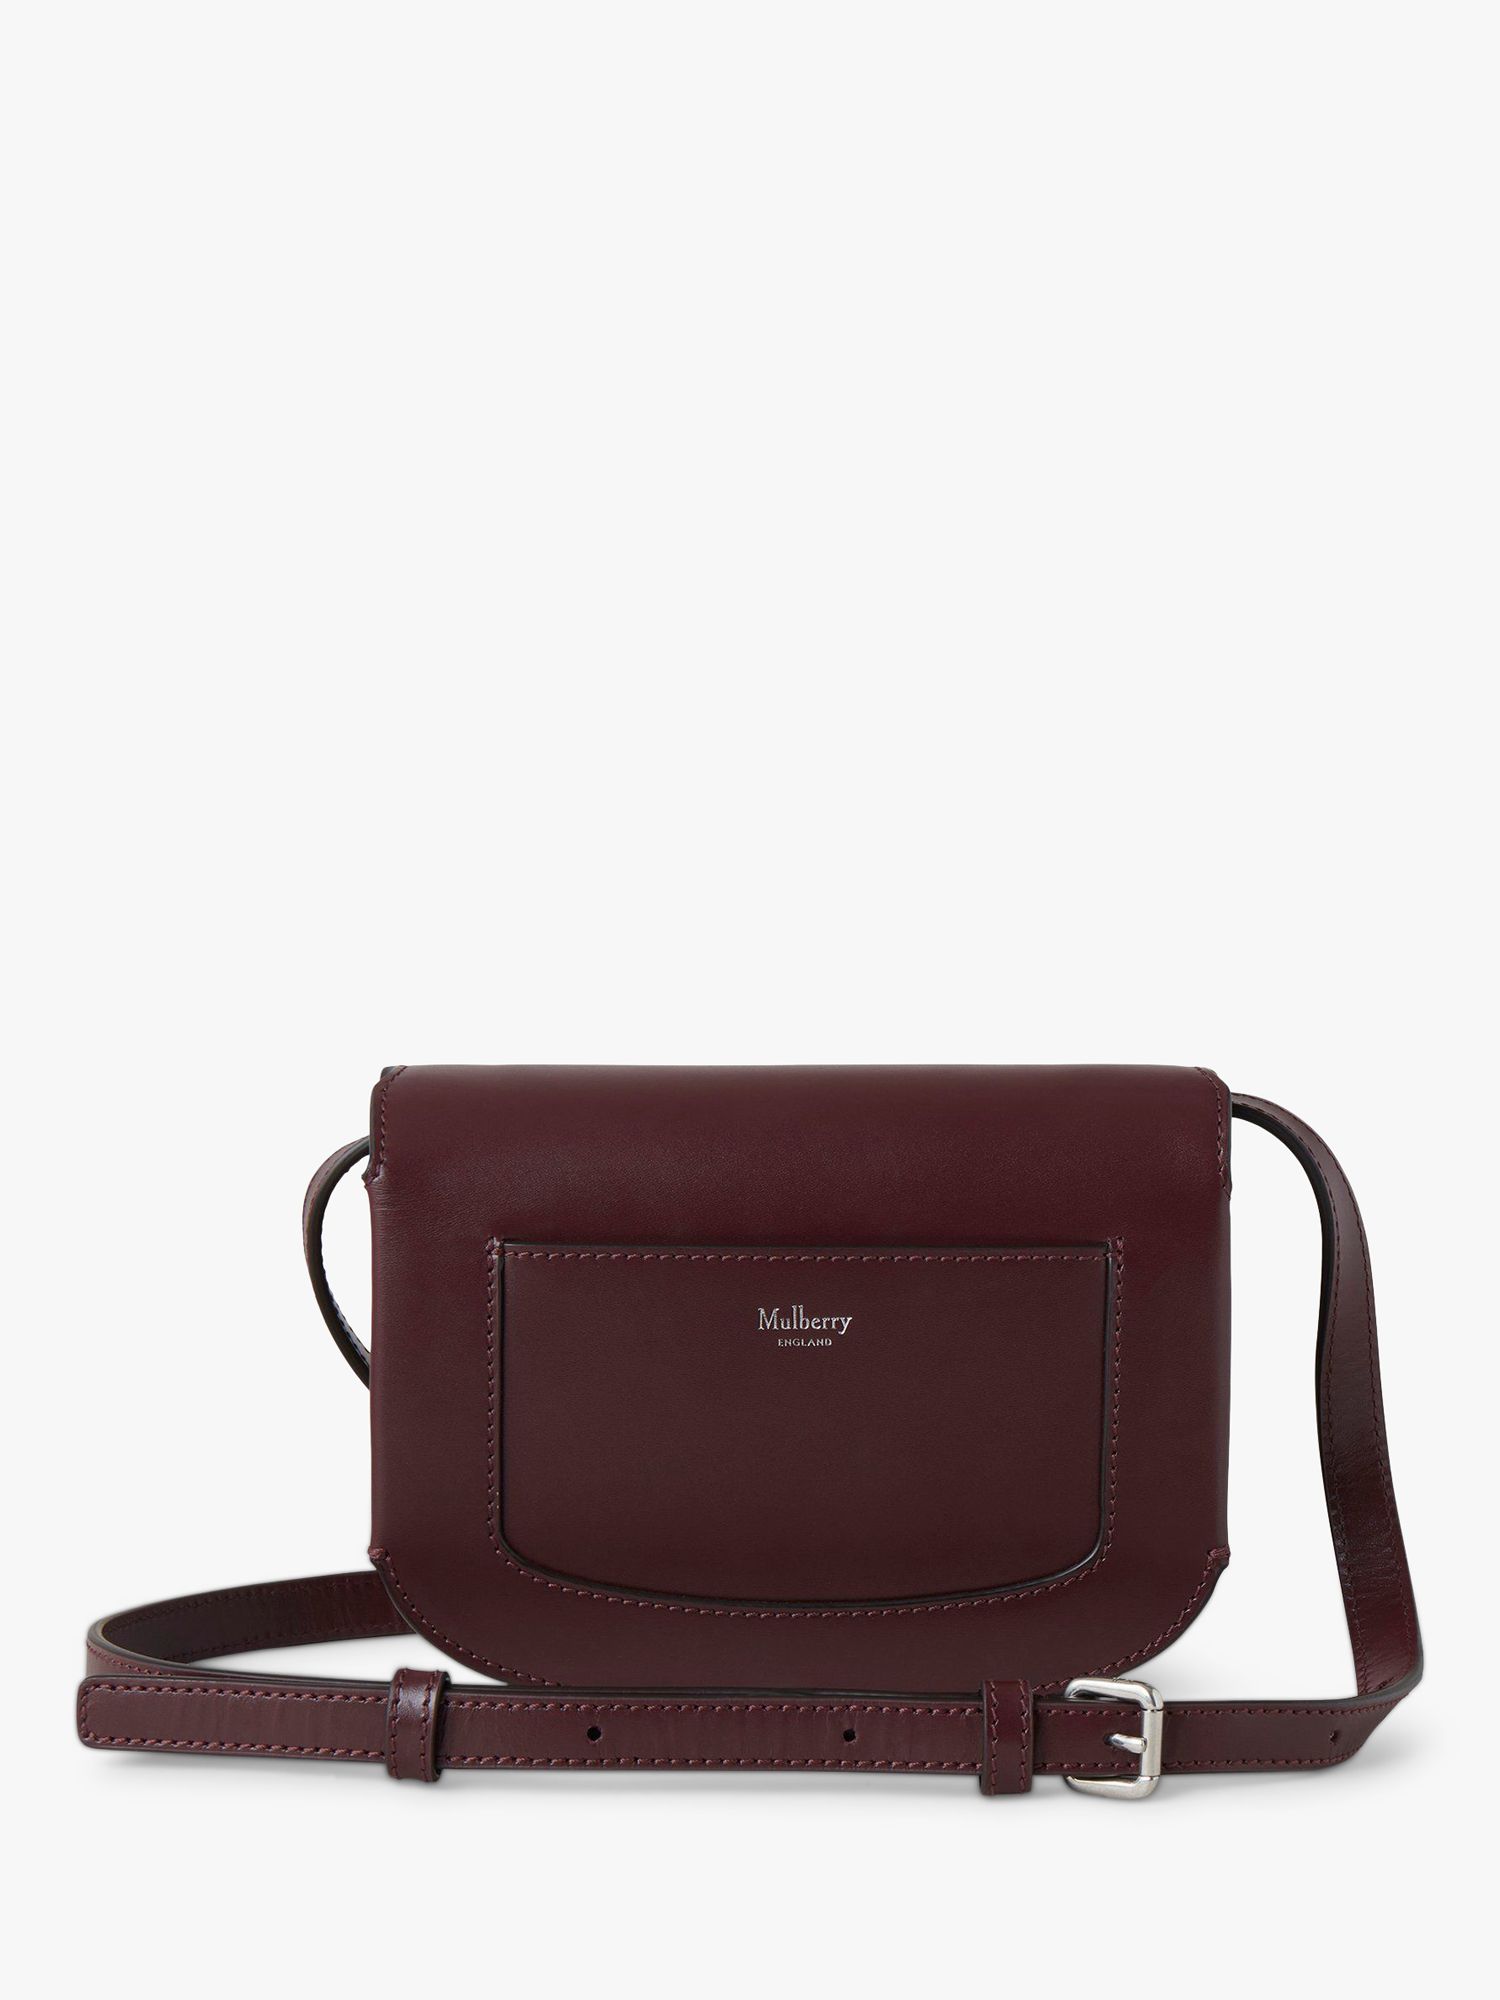 Mulberry Small Pimlico Satchel, Black Cherry at John Lewis & Partners